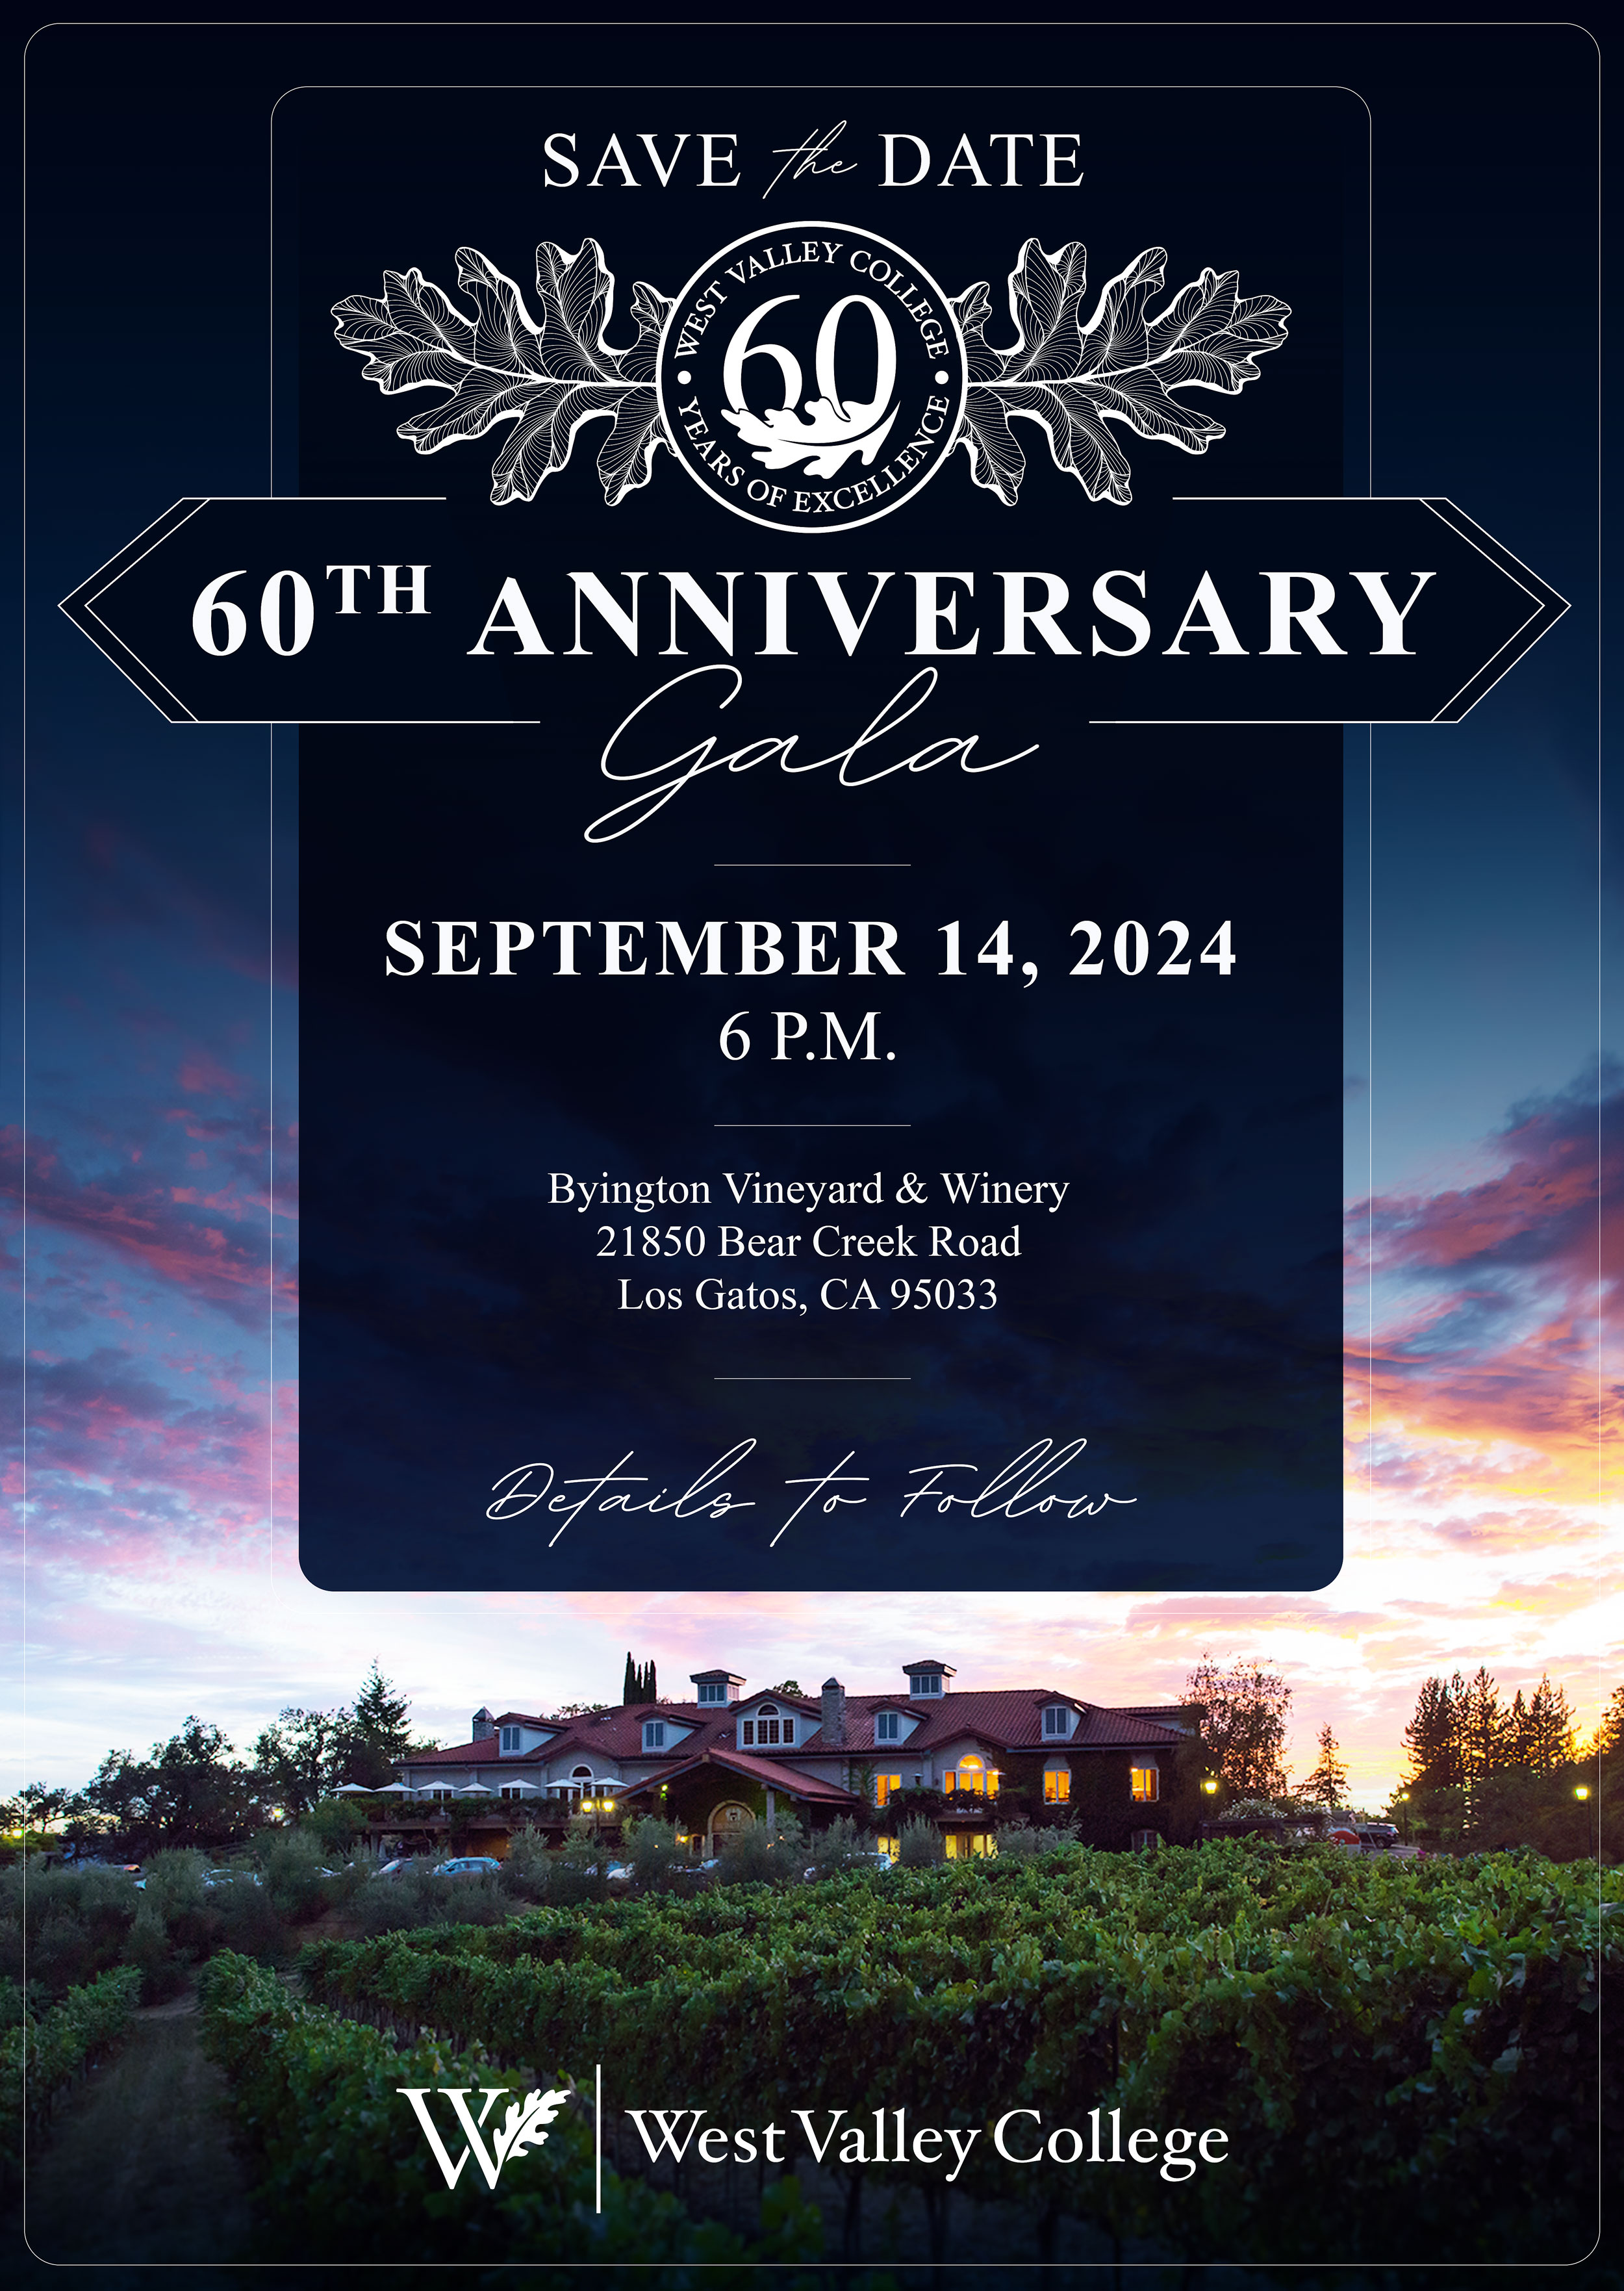 Save the Date for WVC 60th Anniversary Gala